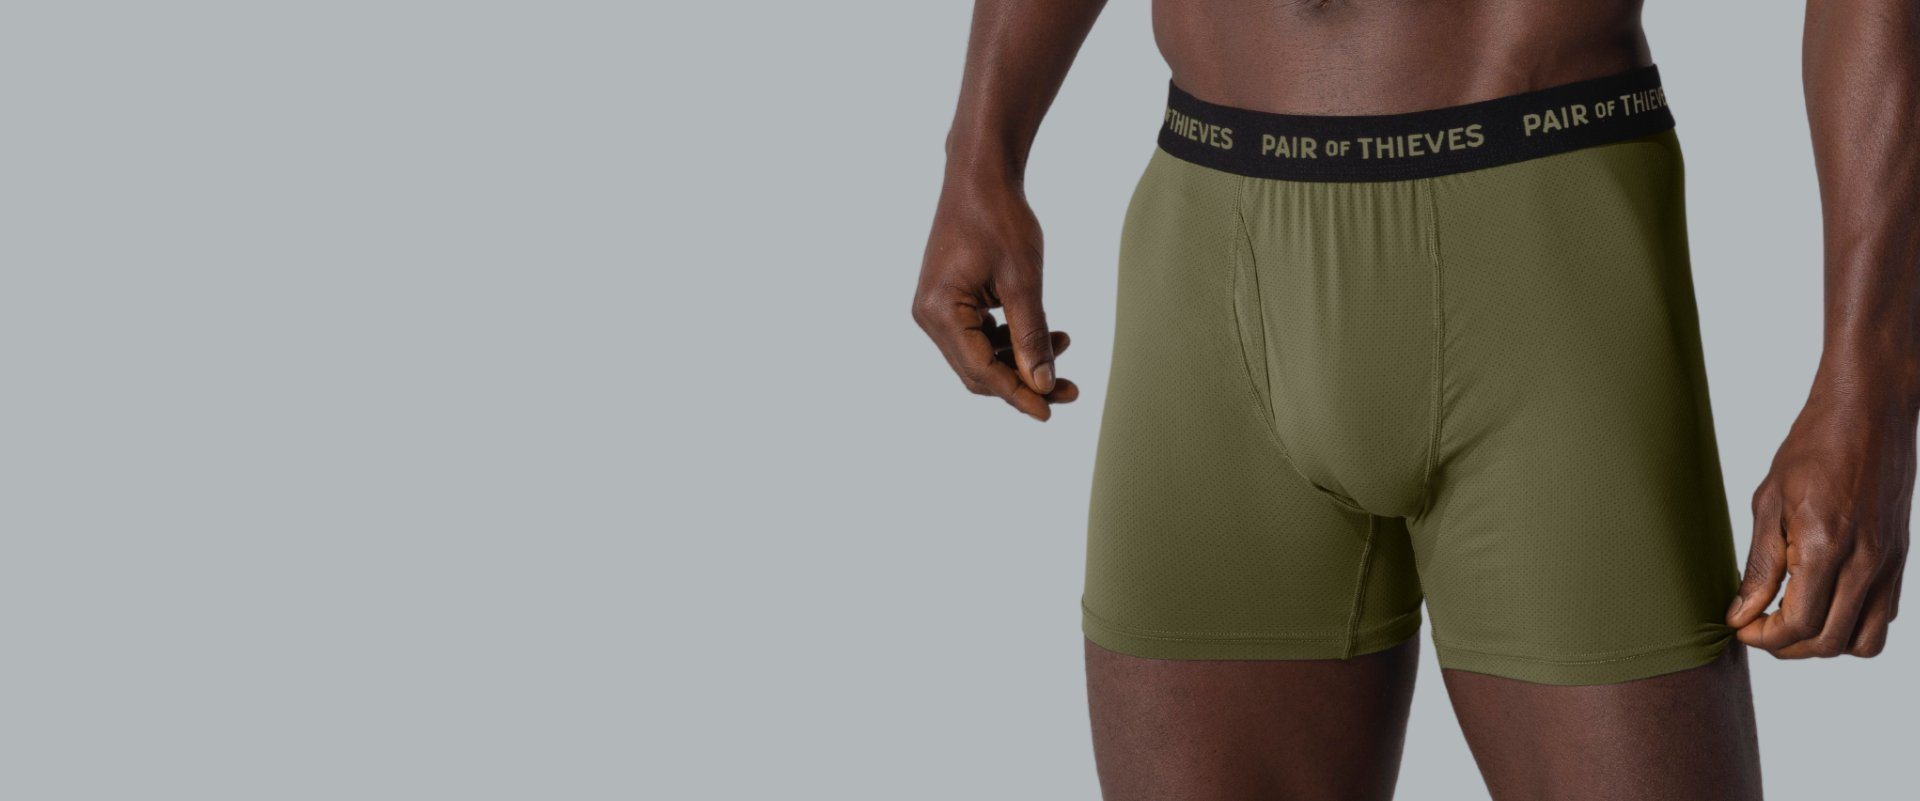 Pair Of Thieves Boxer Briefs Are Seriously Comfortable - The Manual